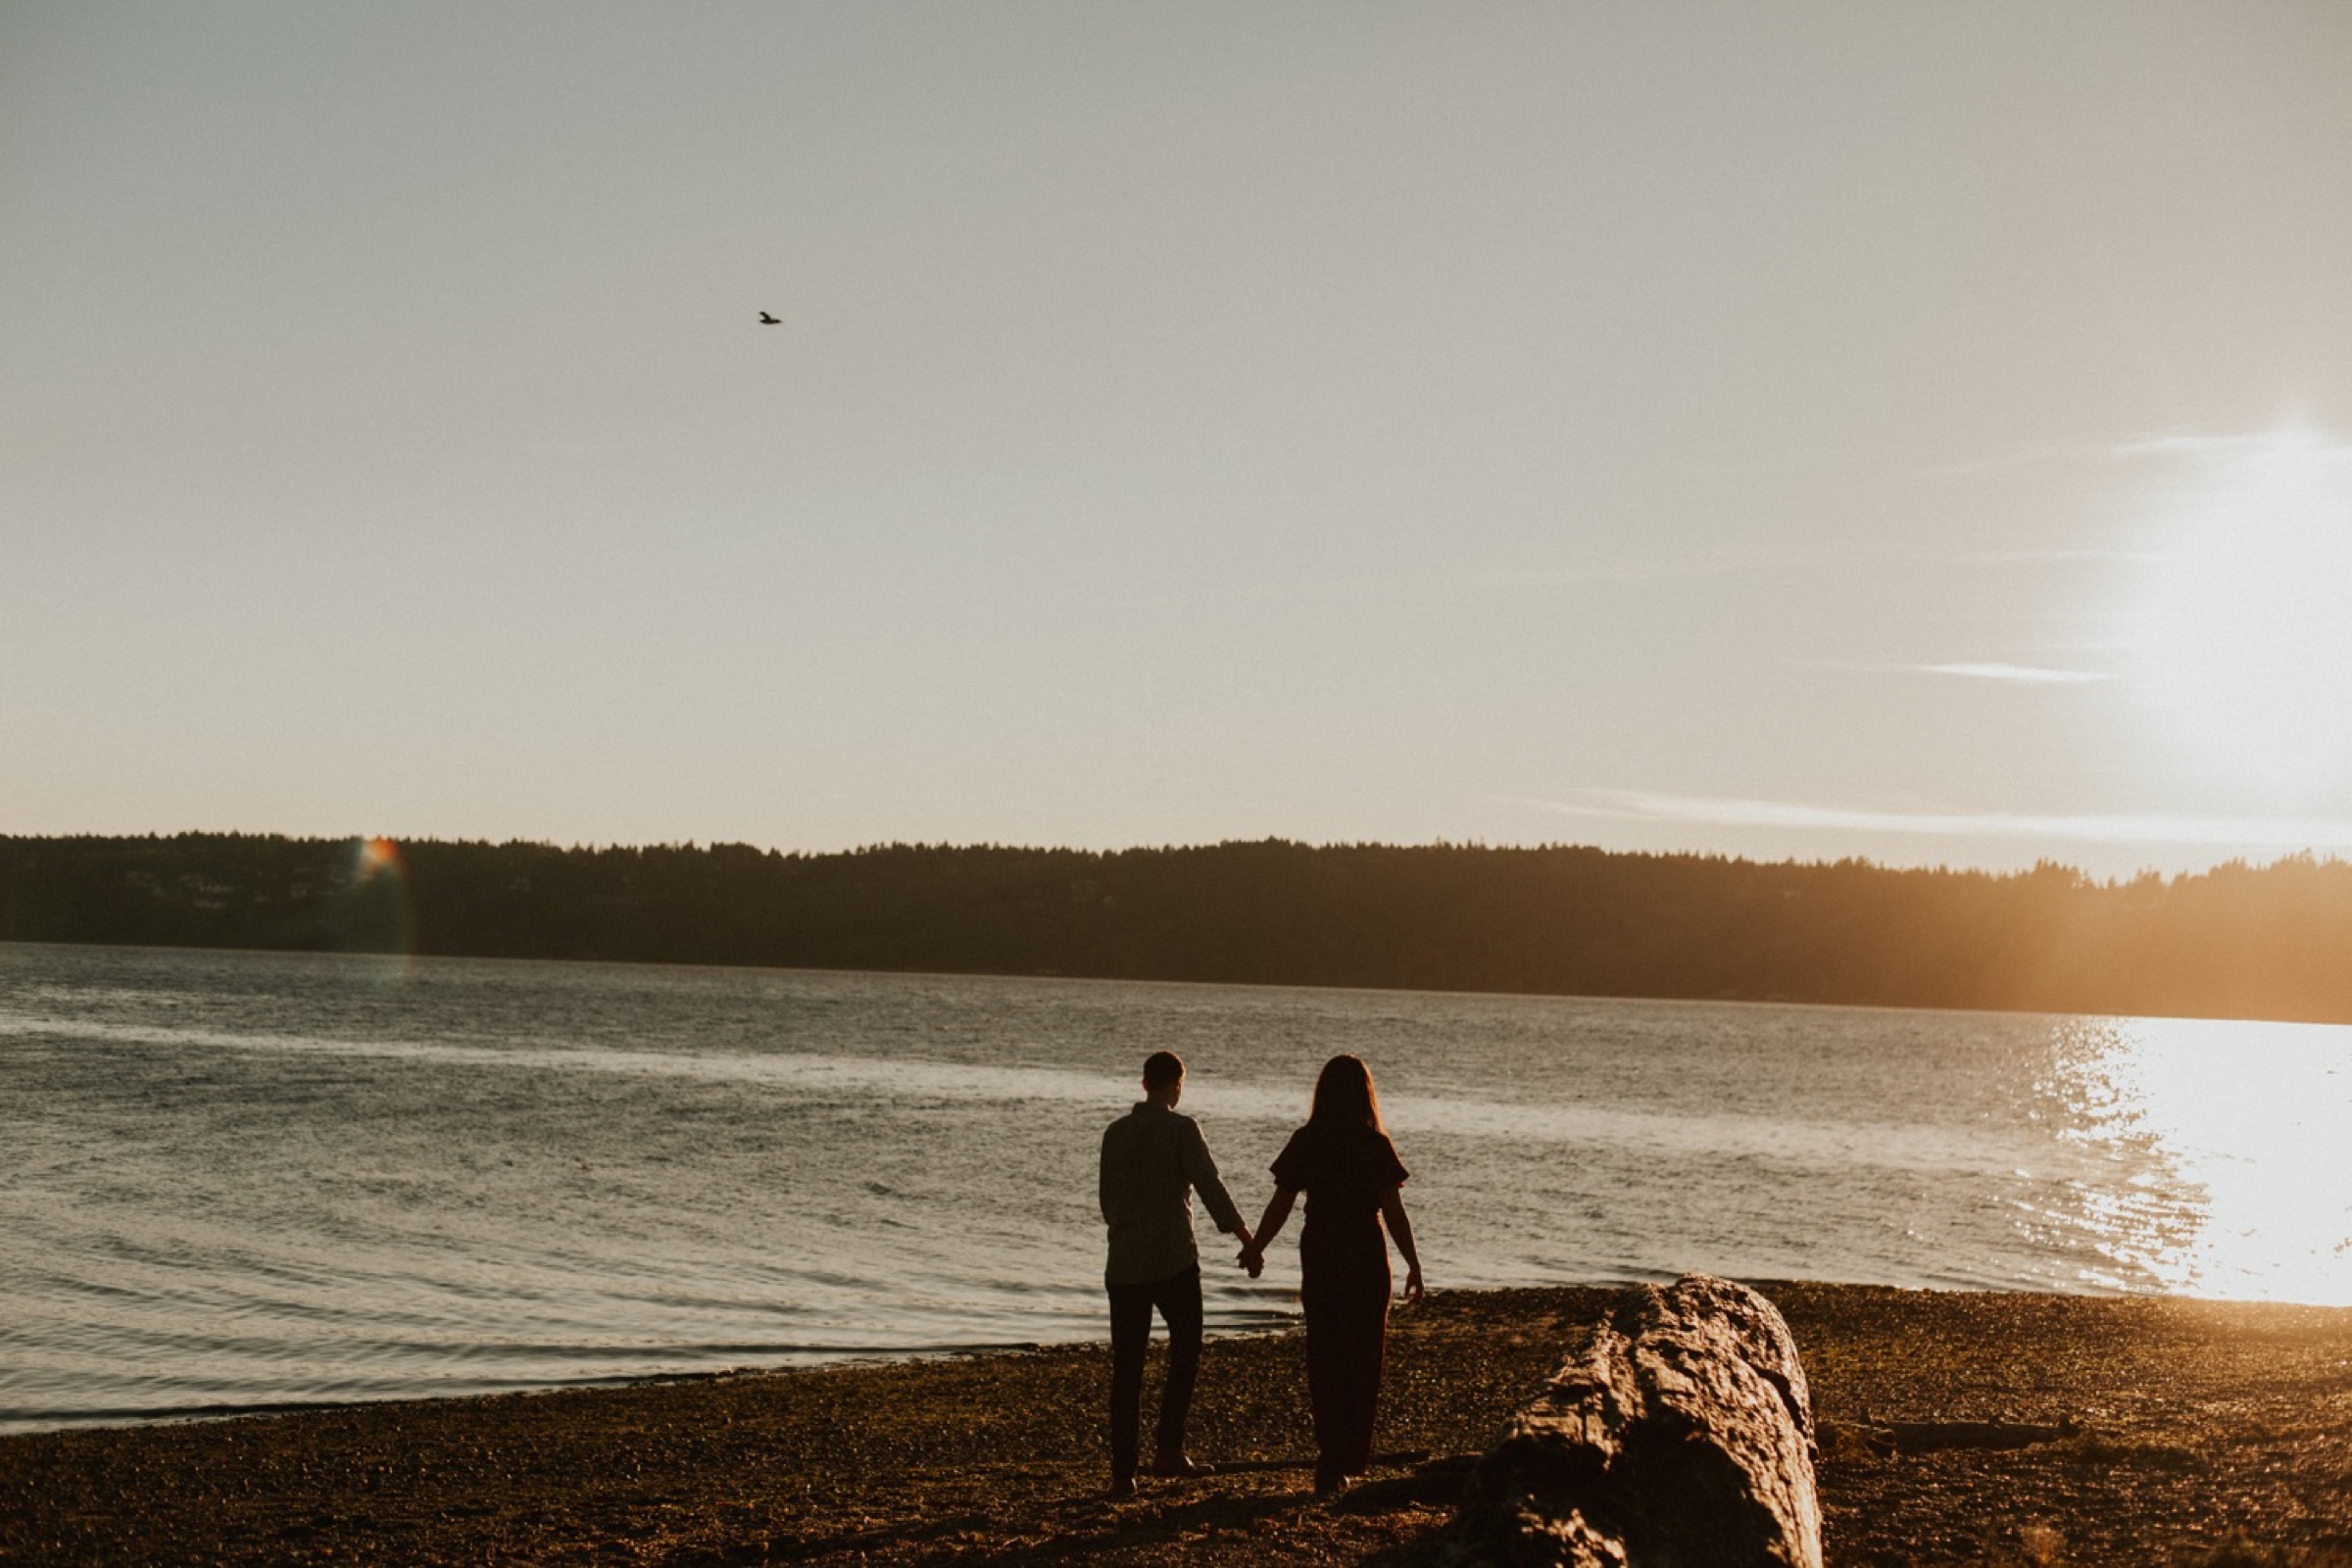 Vashon Island Engagement Session by Sarah Anne Photography